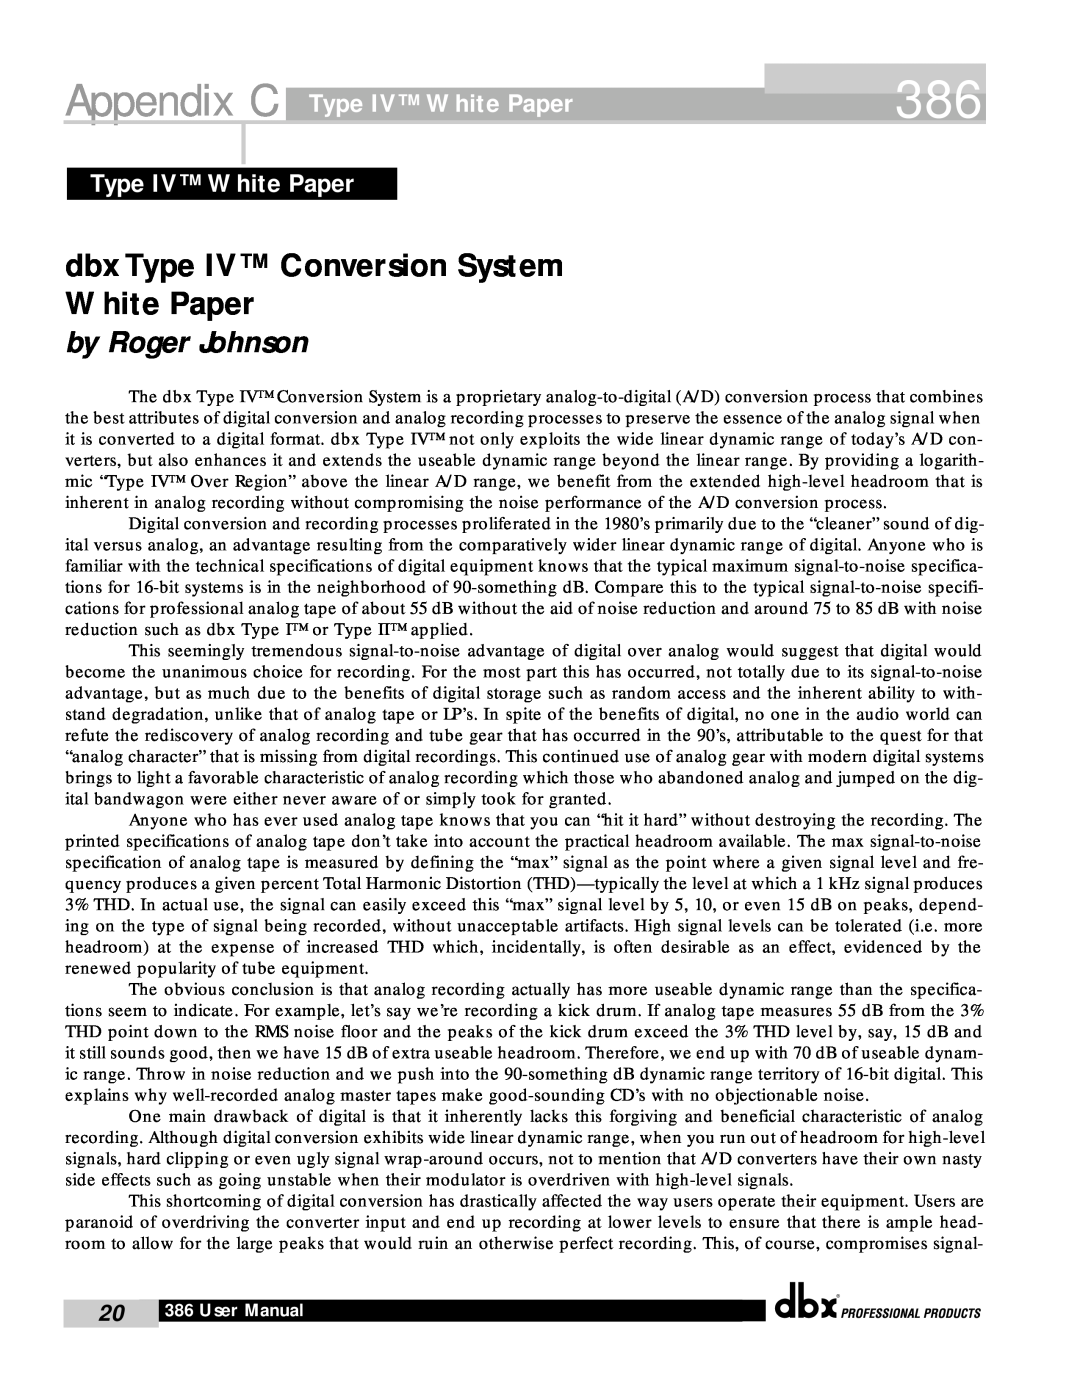 dbx Pro 386 Appendix C, dbx Type IV Conversion System White Paper, Type IV White Paper, by Roger Johnson, User Manual 